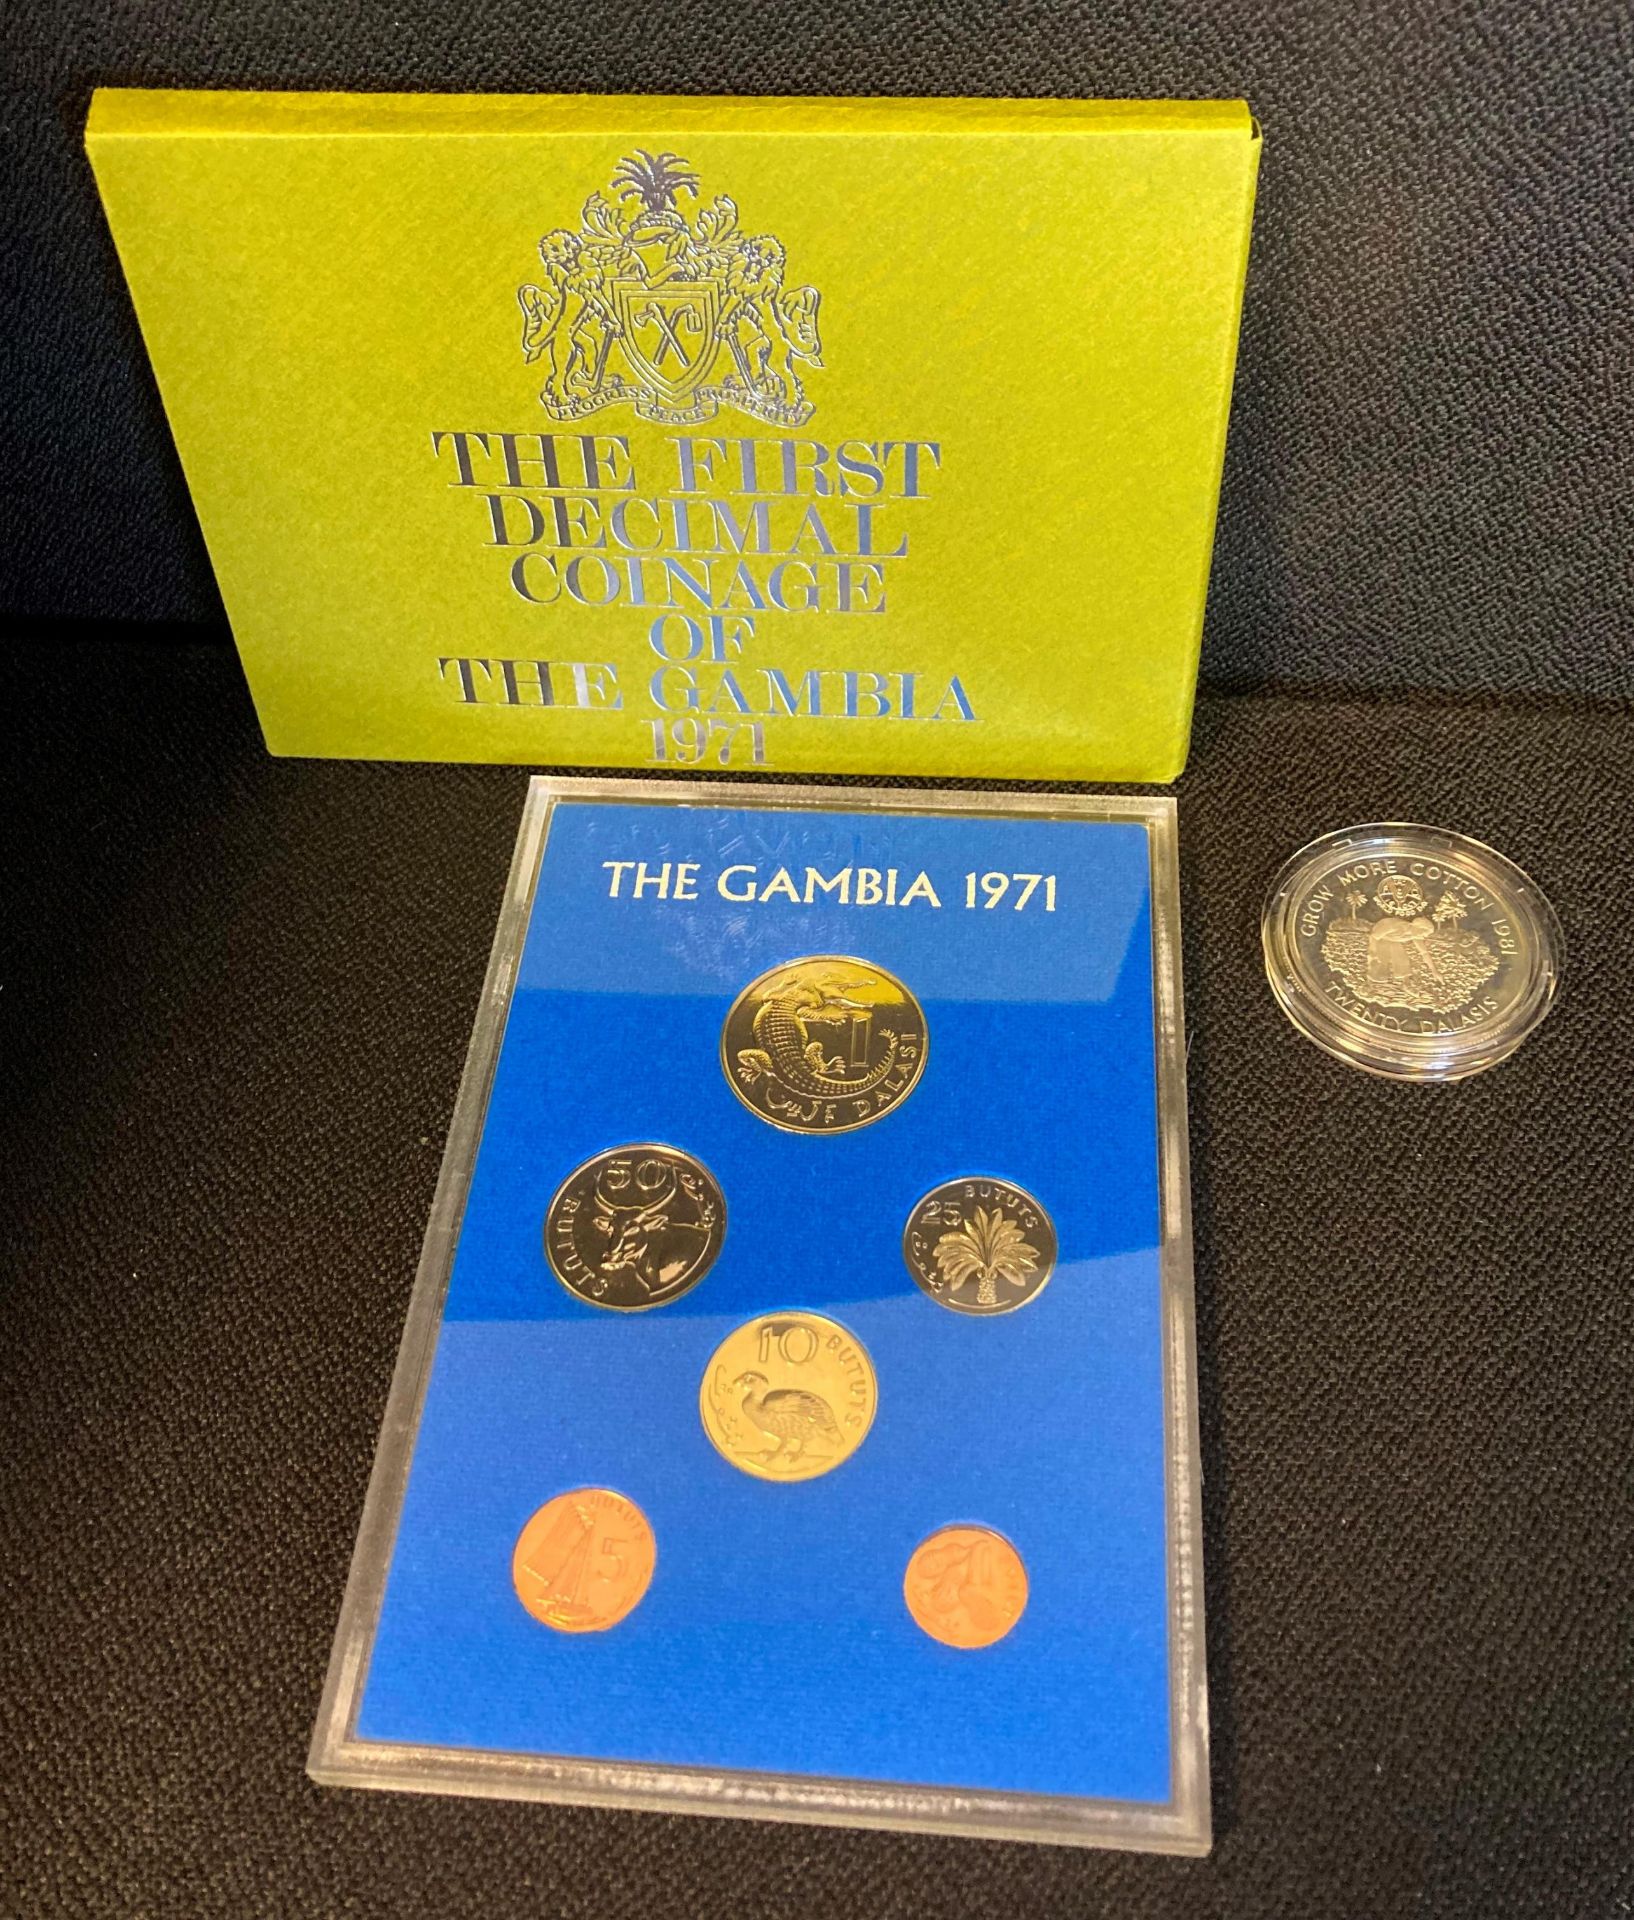 A Royal Mint The First Decimal Coinage of The Gambia 1971,